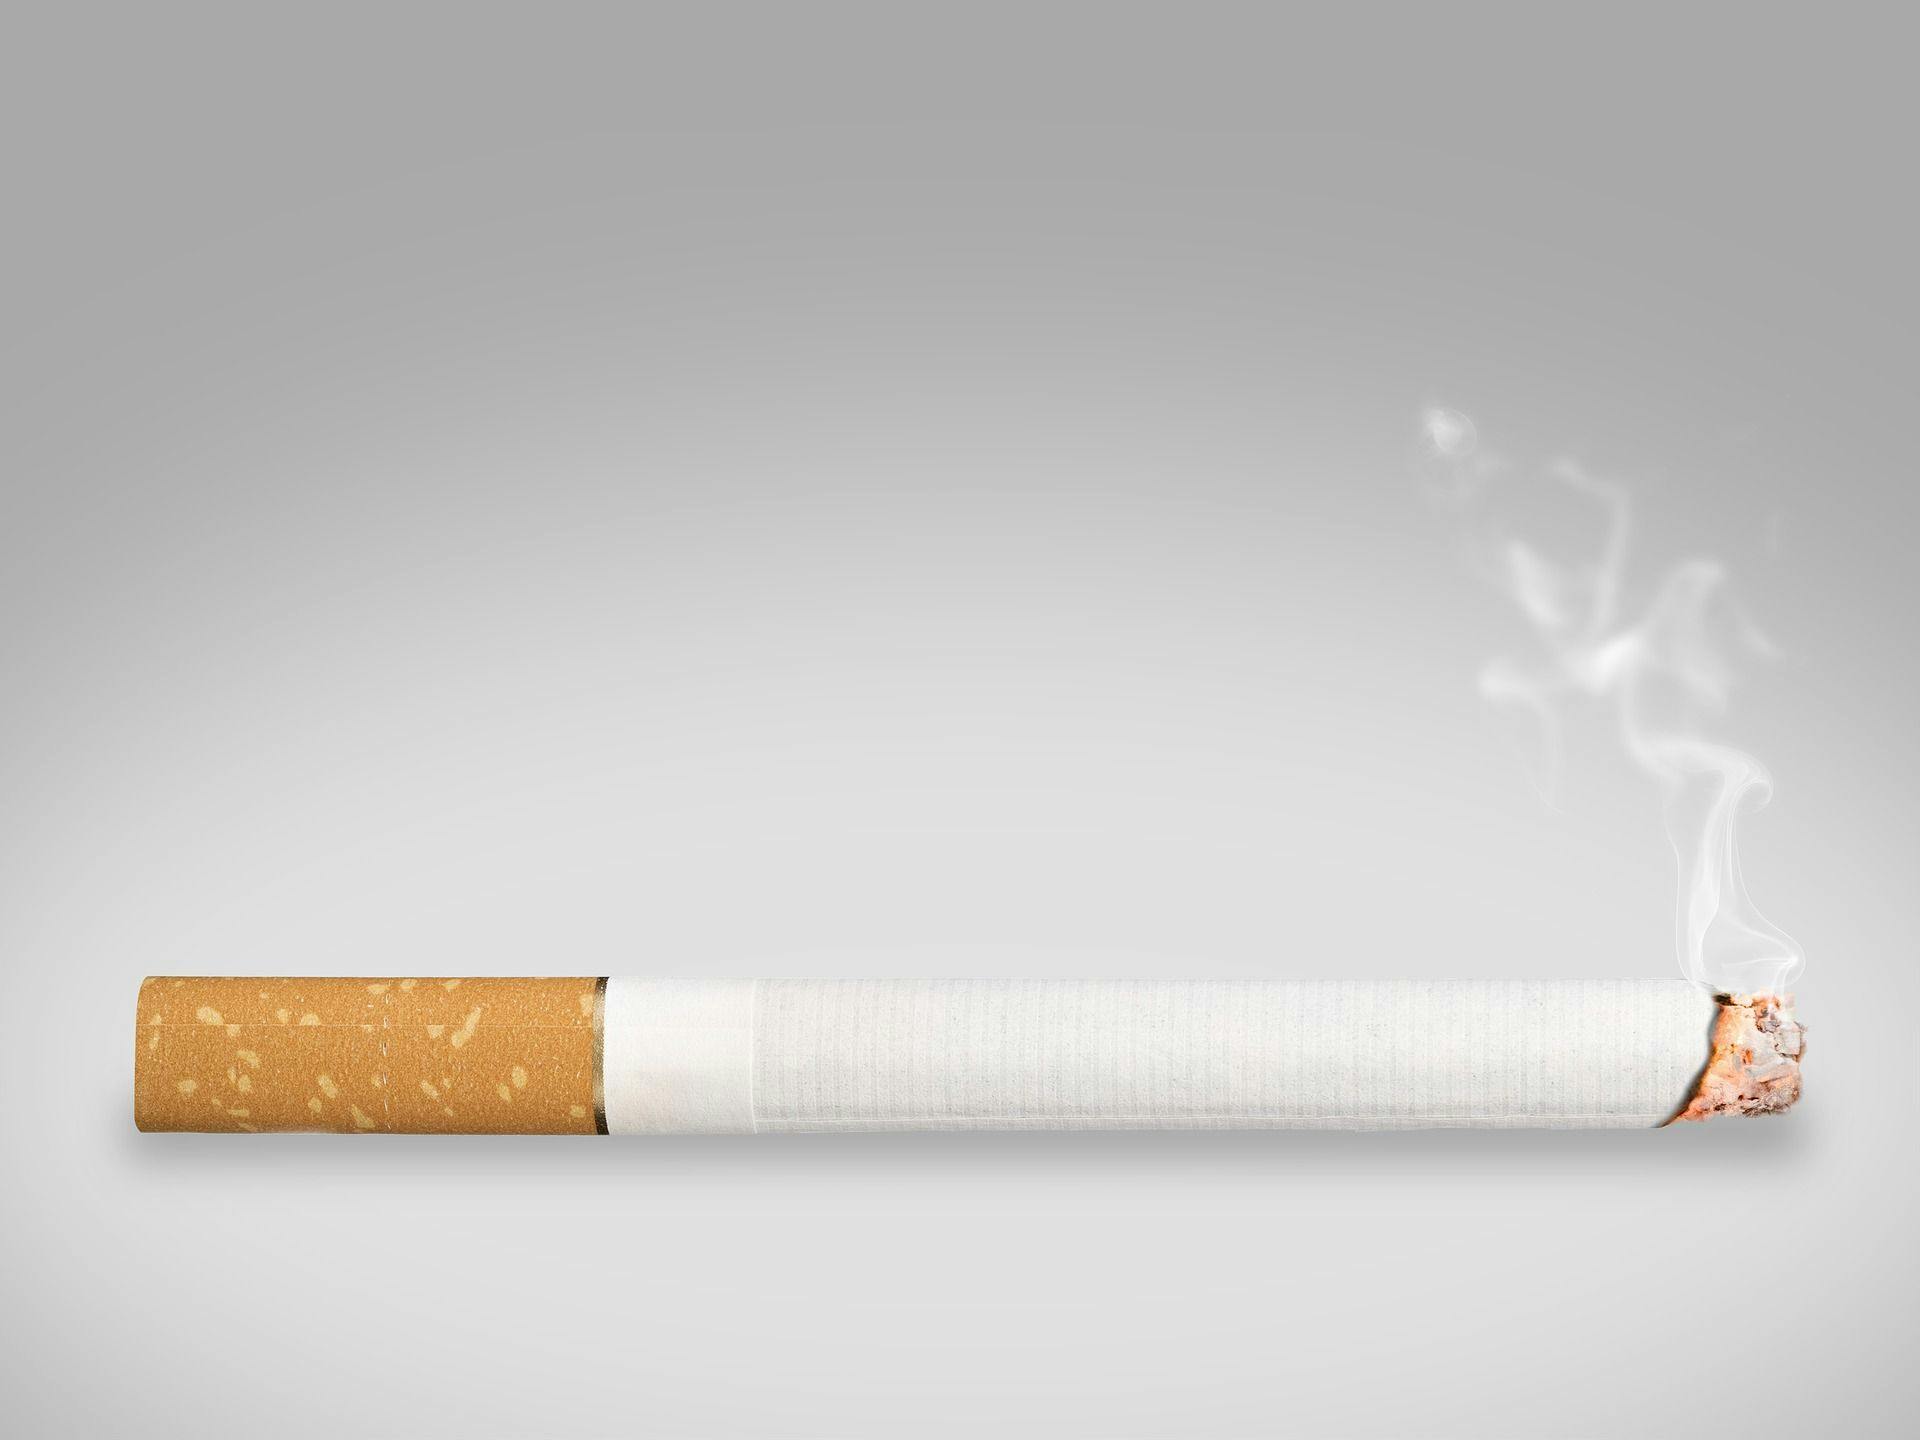 Study: Smokers Can Lower CVD Risk Significantly by Quitting